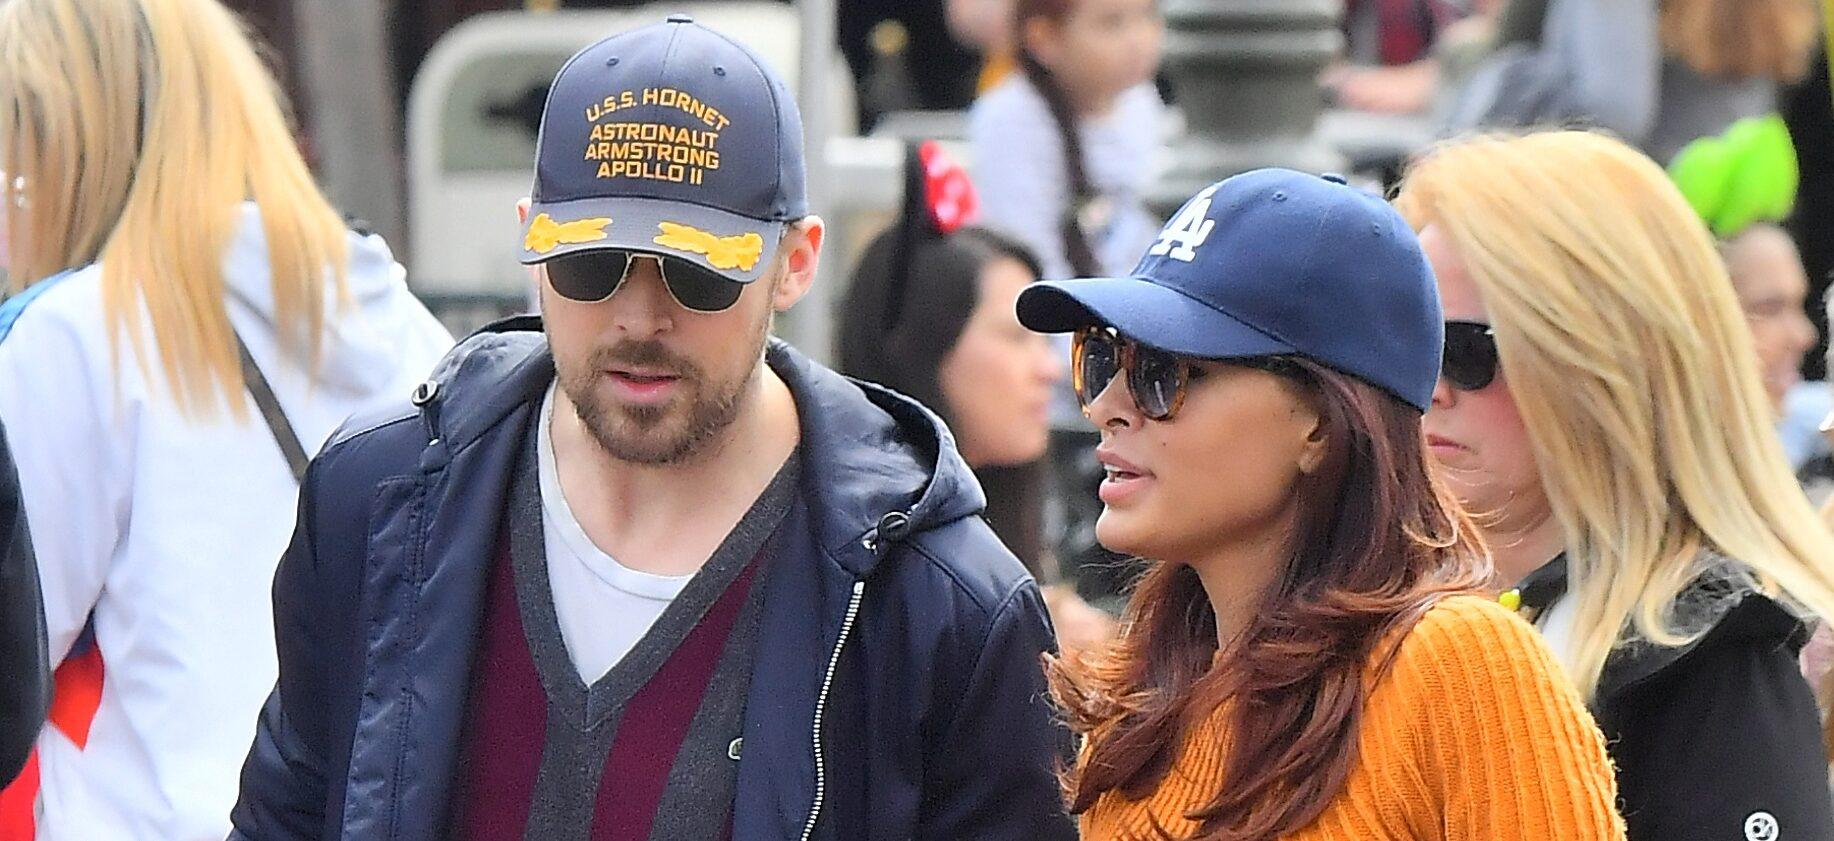 Why Eva Mendes Wanted Ryan Gosling Back Home After Electrifying Oscars Performance